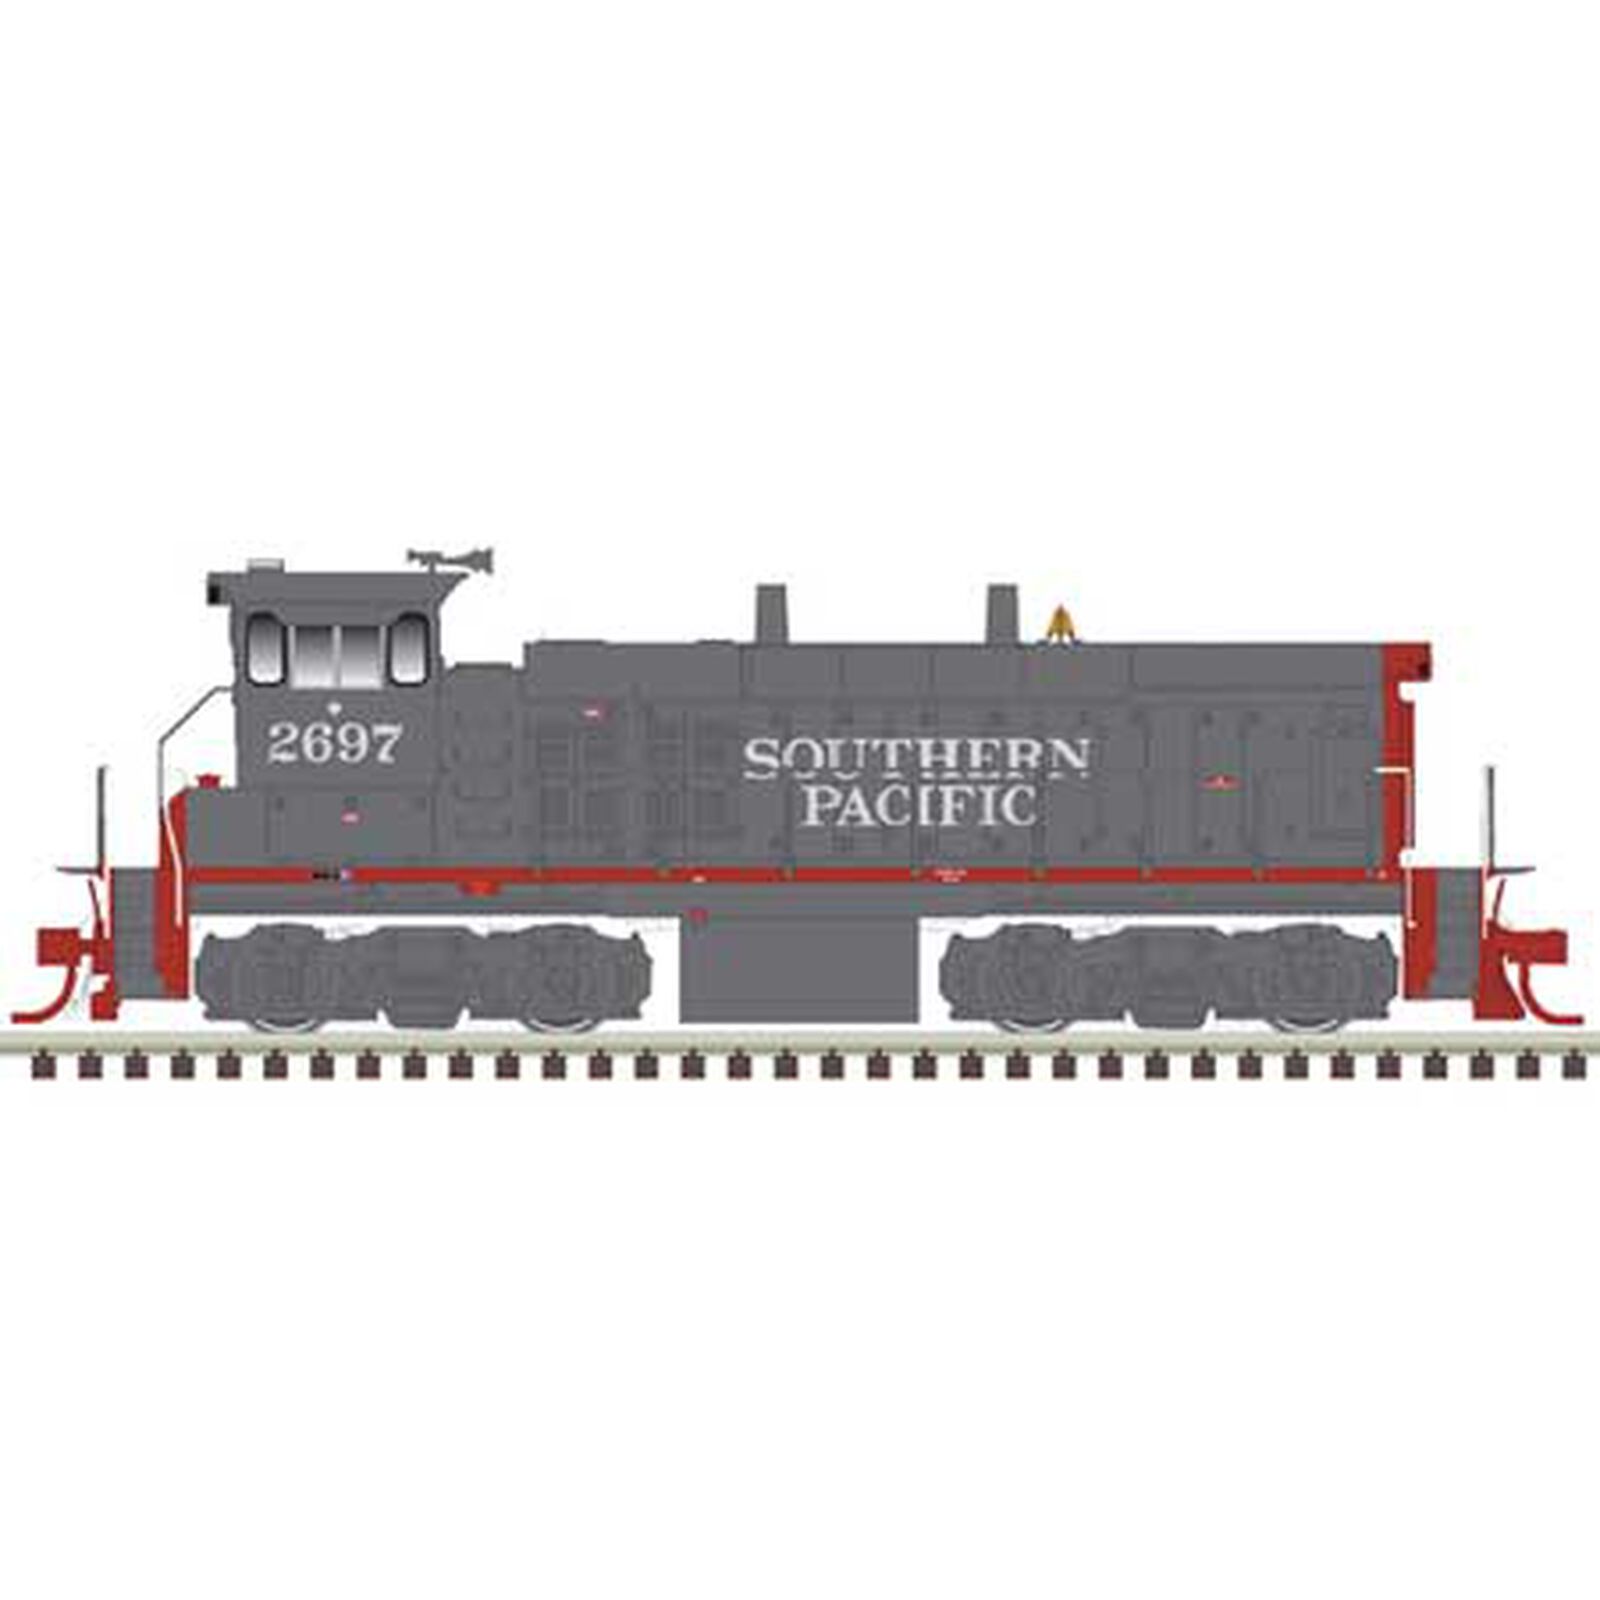 Southern Pacific 2691 (Gray/Scarlet)